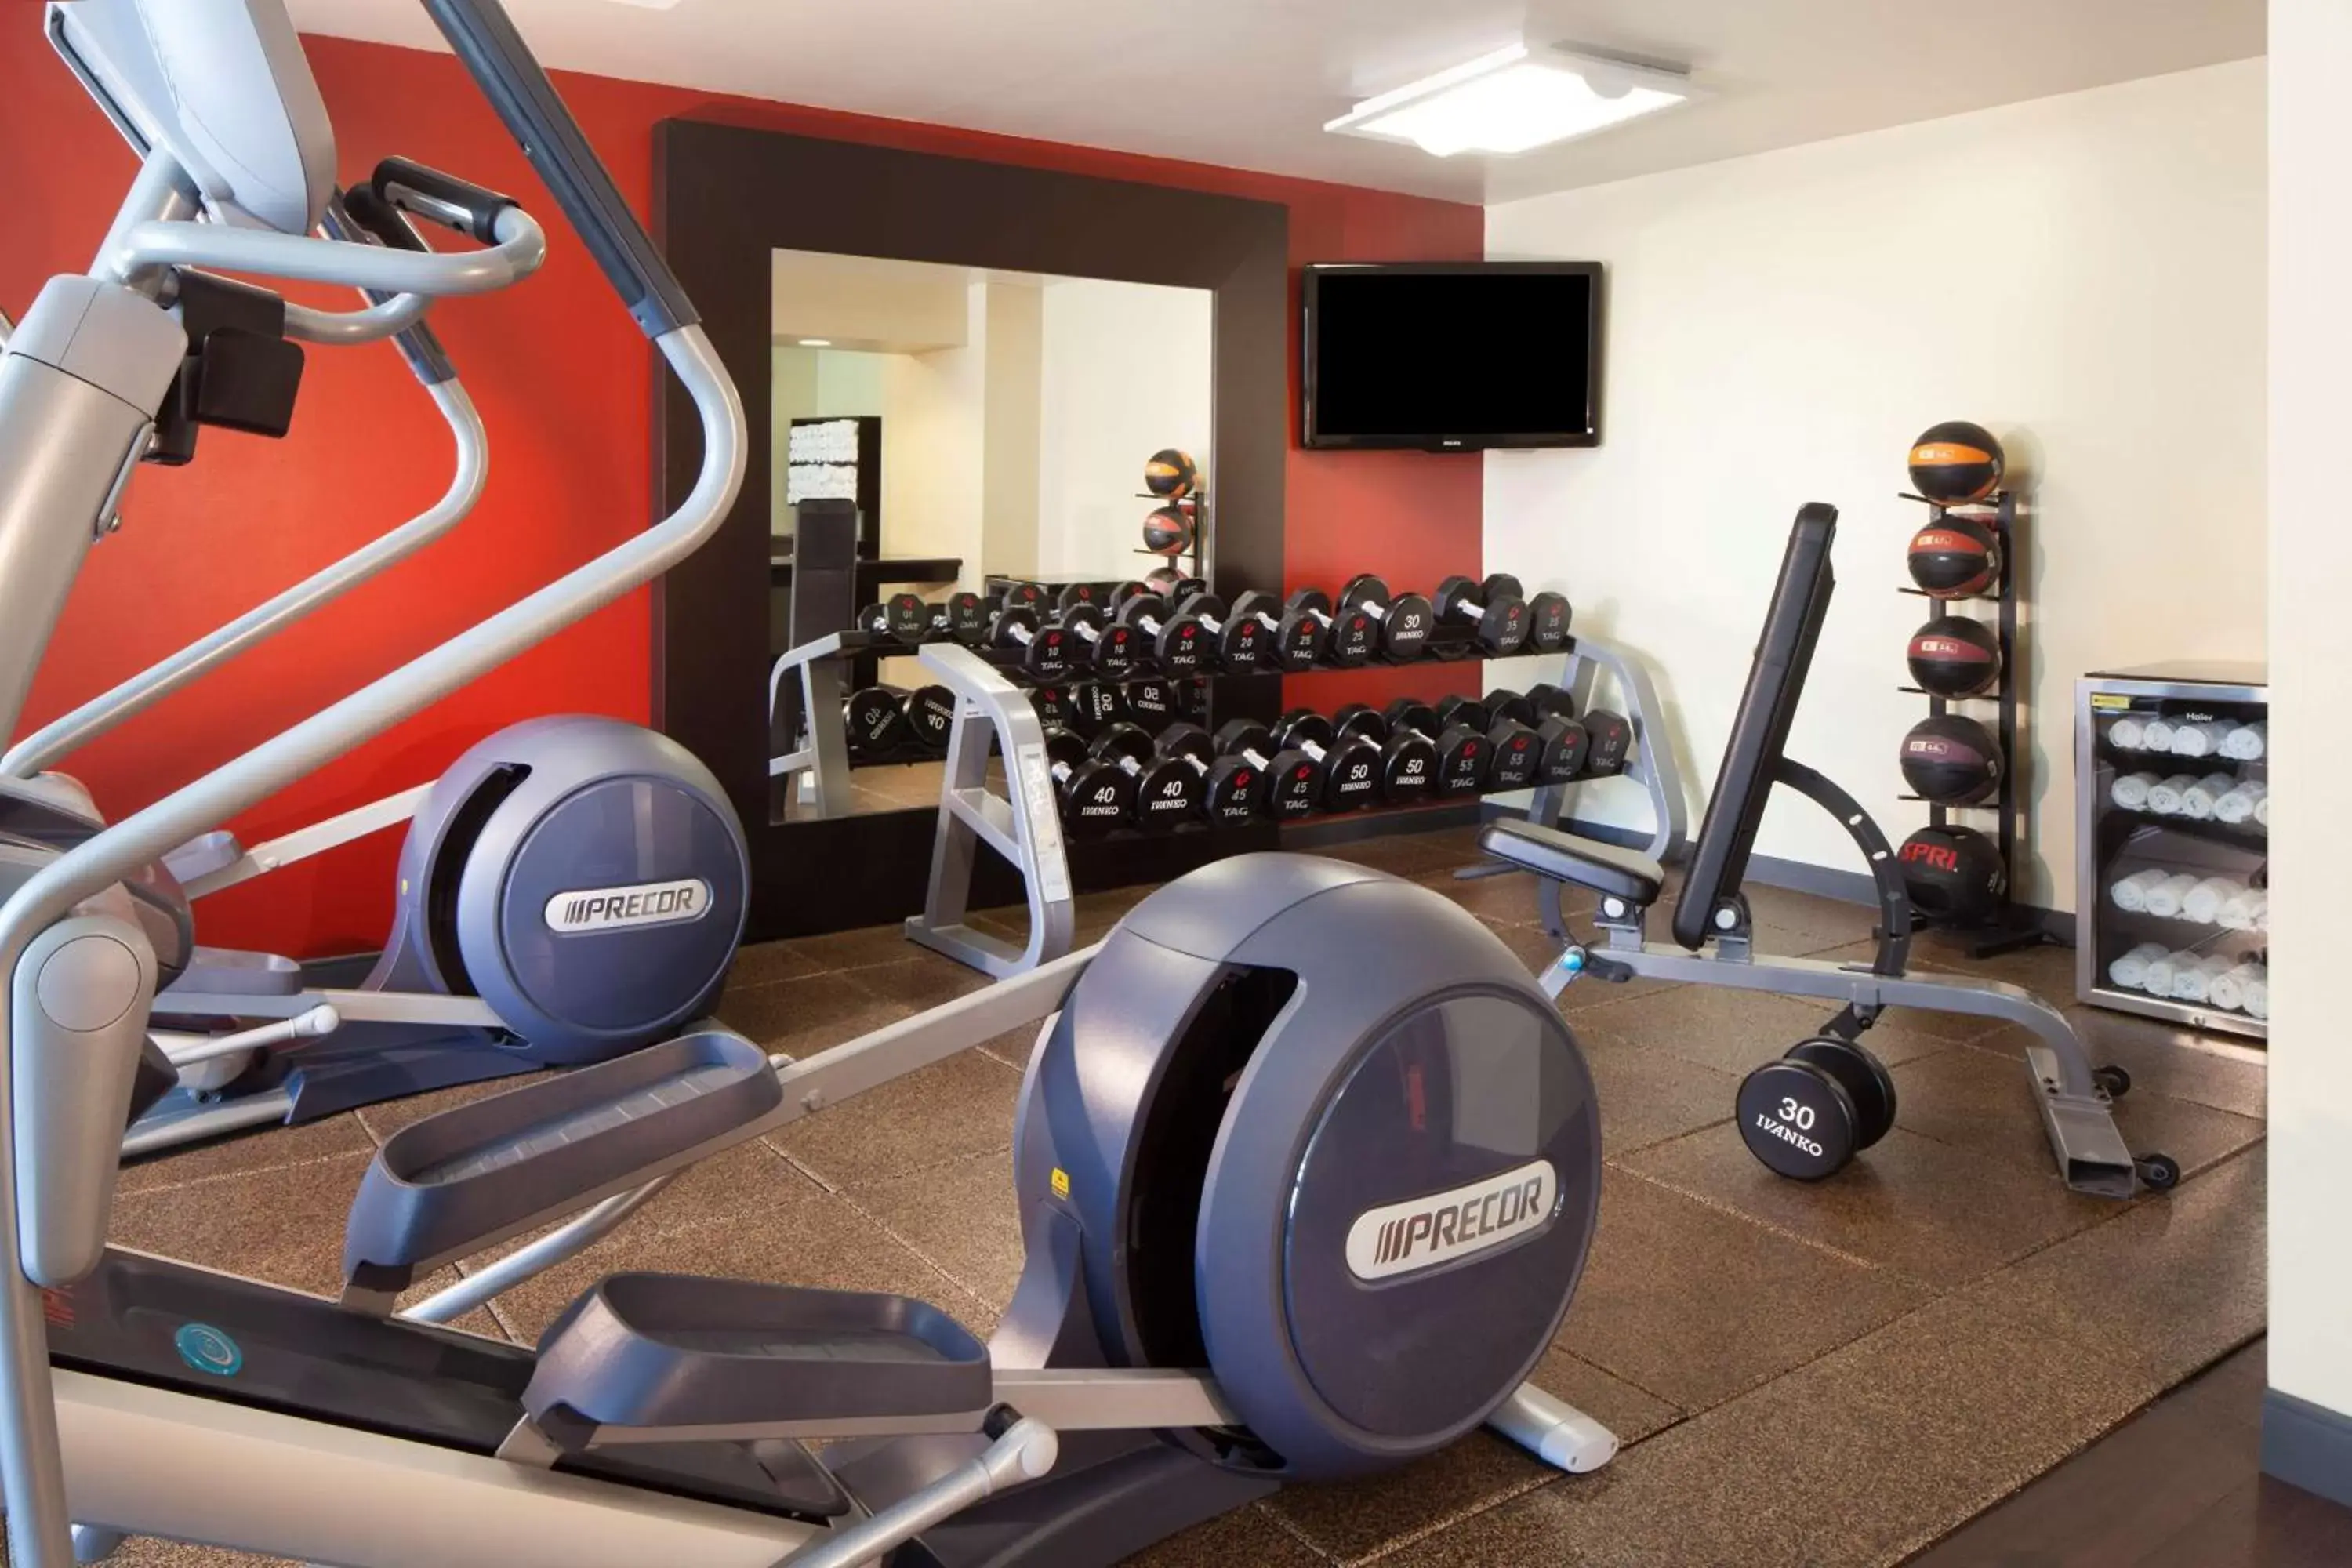 Fitness centre/facilities, Fitness Center/Facilities in DoubleTree by Hilton El Paso Downtown